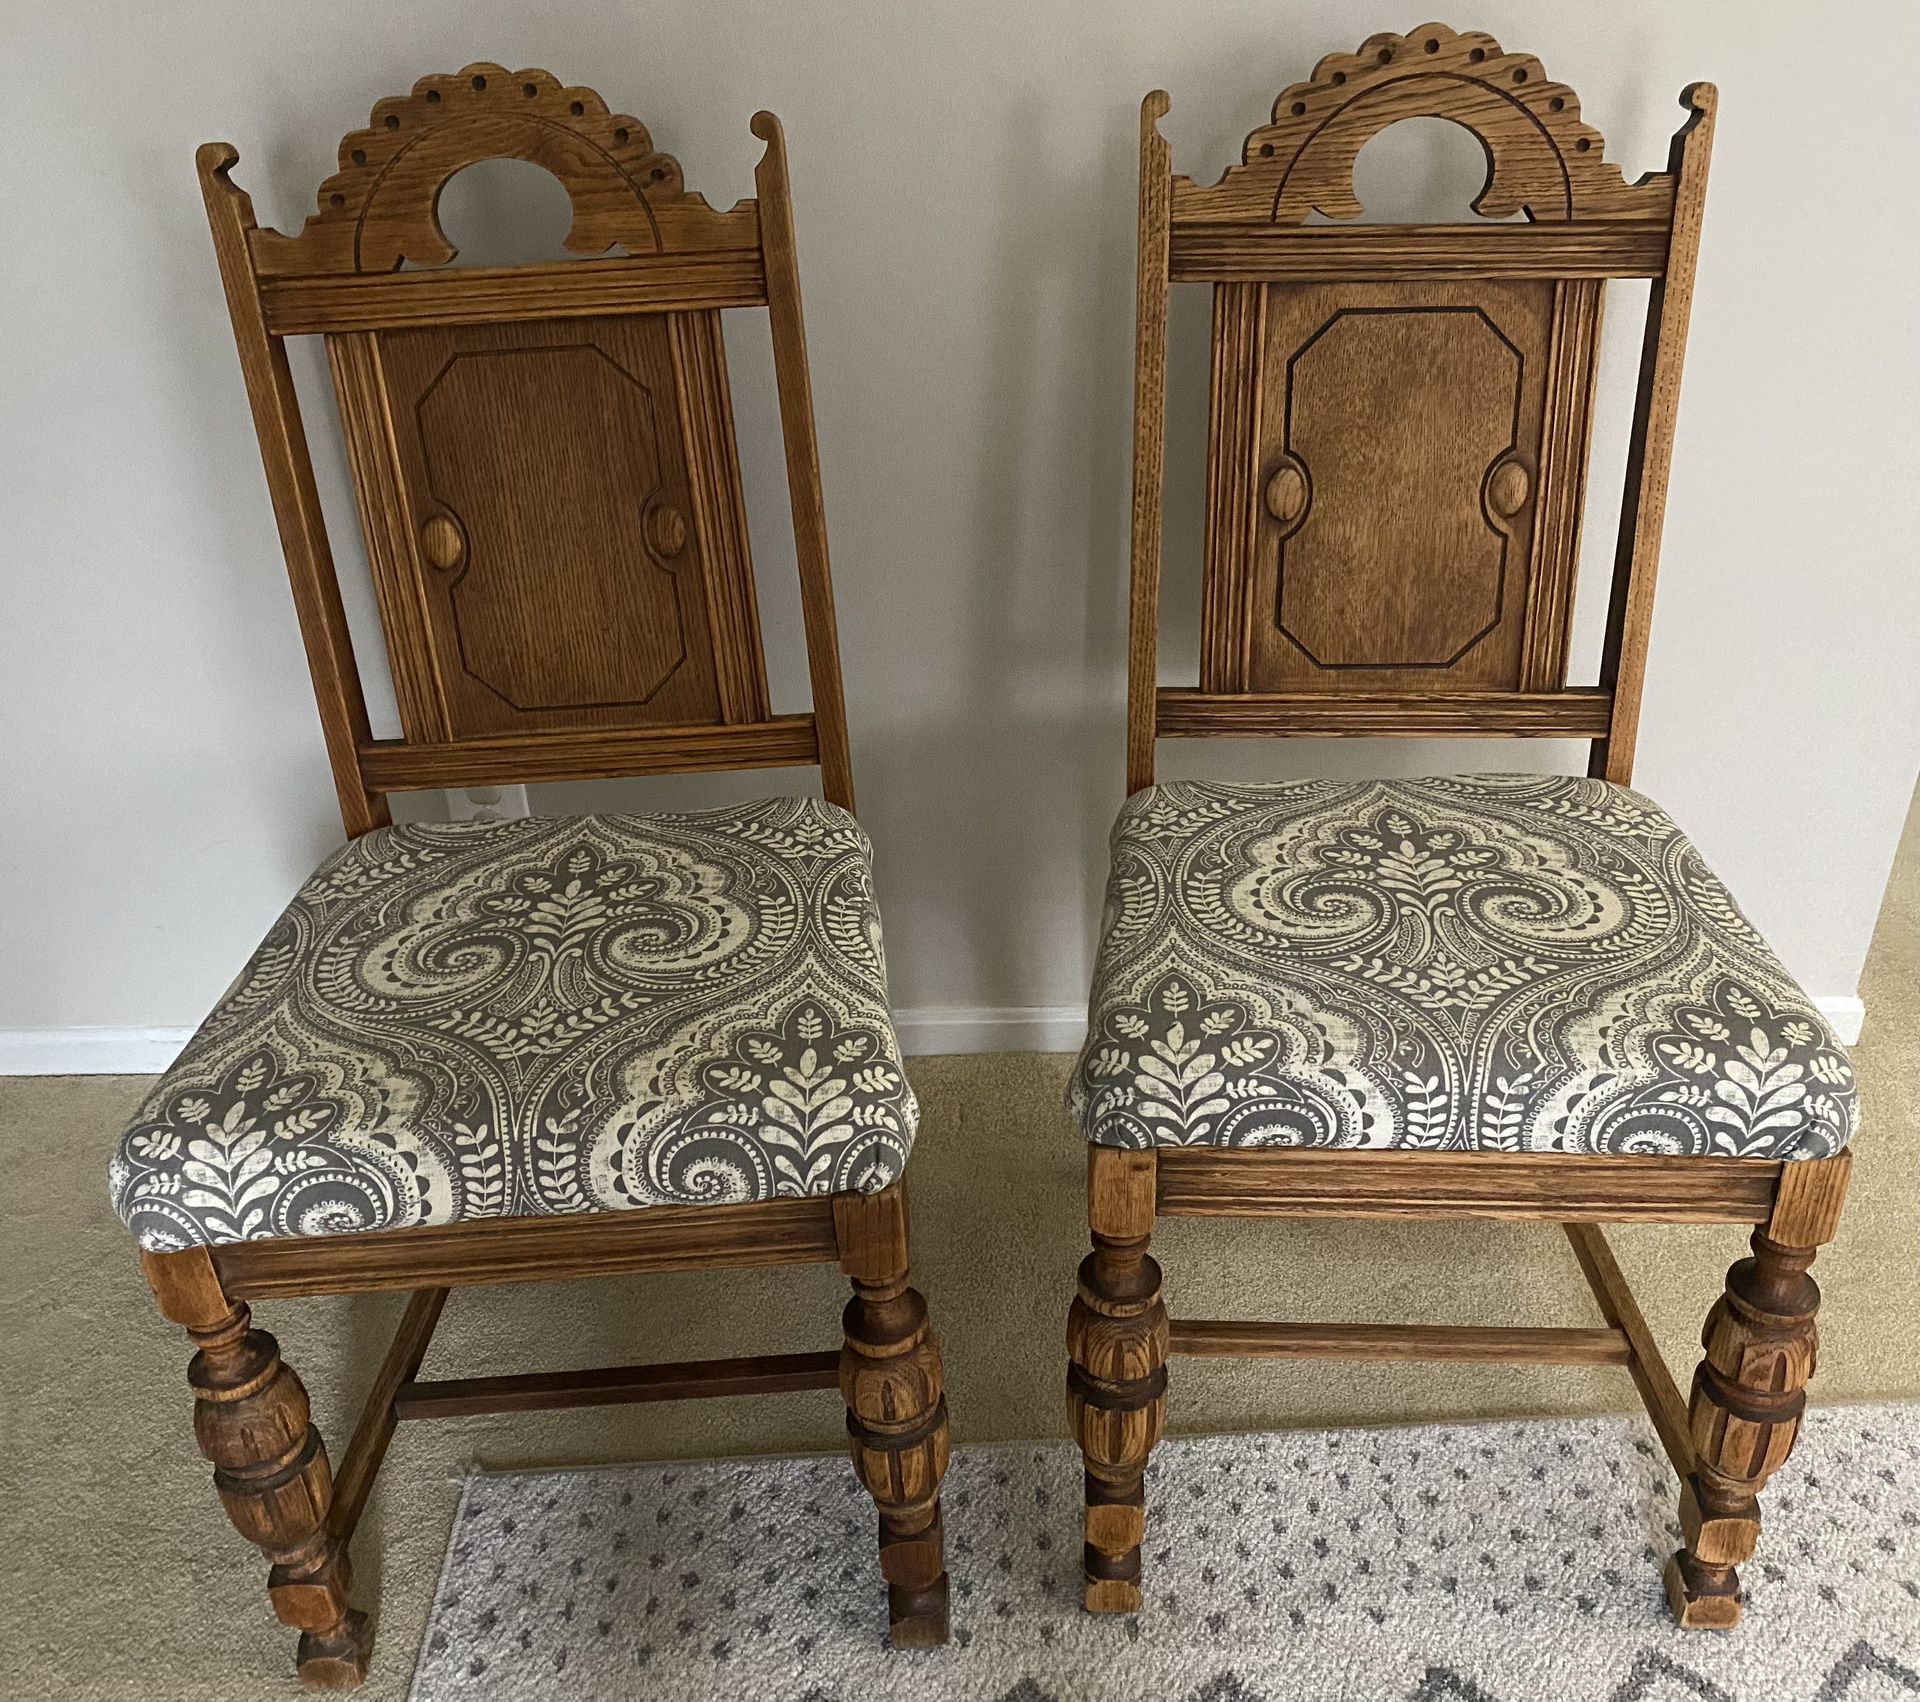 Reupholstered Antique Chairs